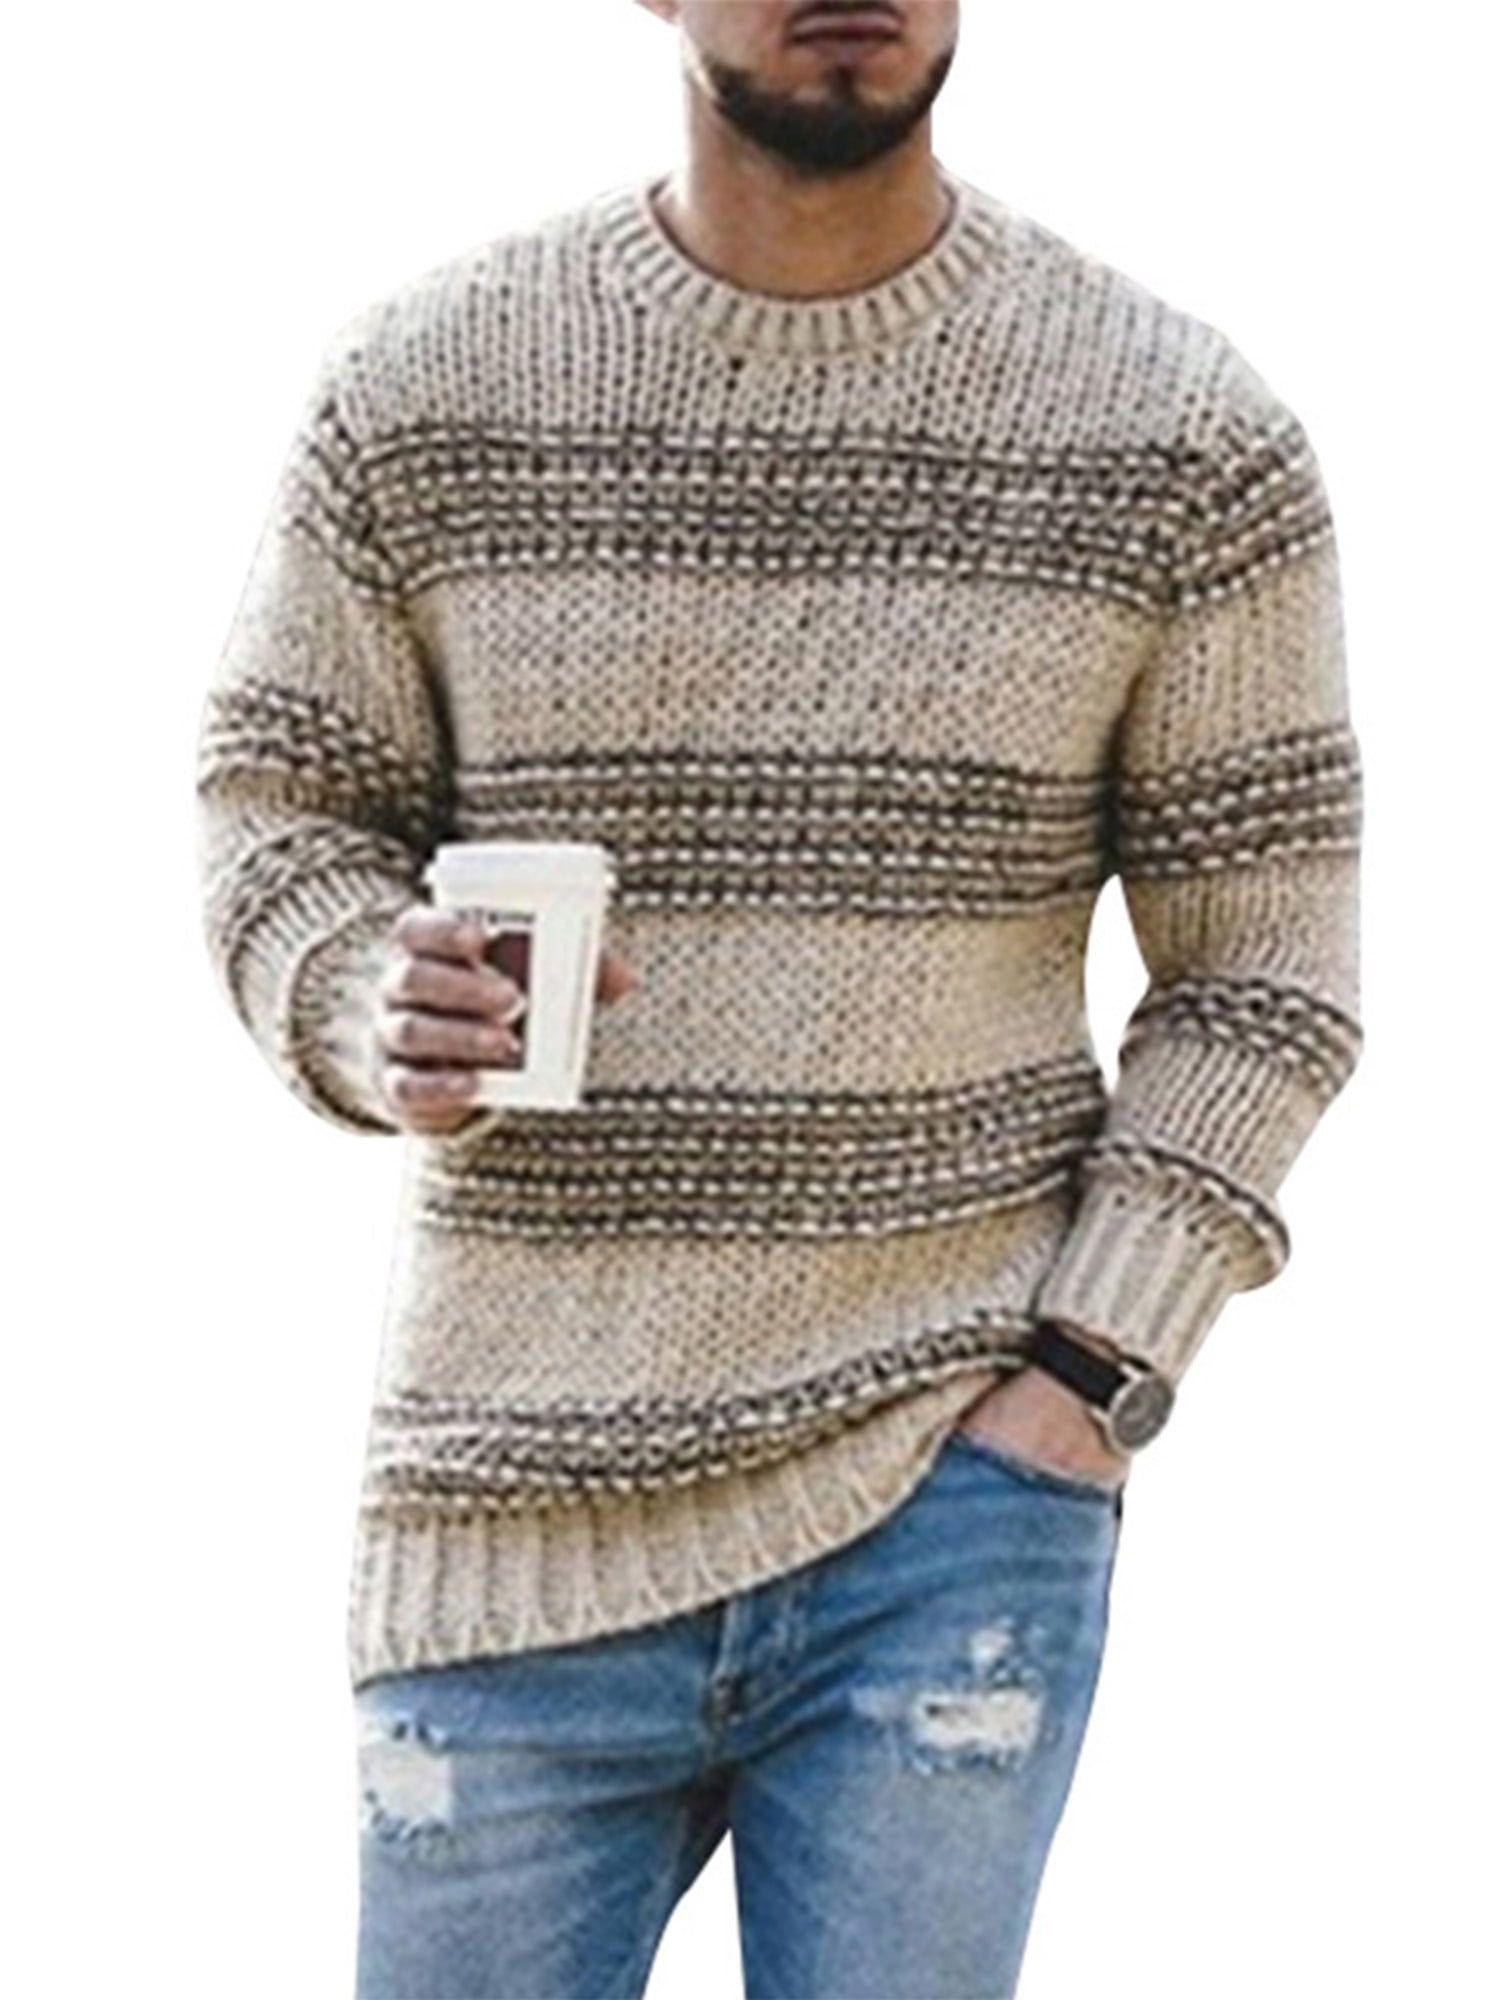 US New Men Slim Fit Knitted Crew Neck Long Sleeve Knitwear Pullover Sweater Tops 